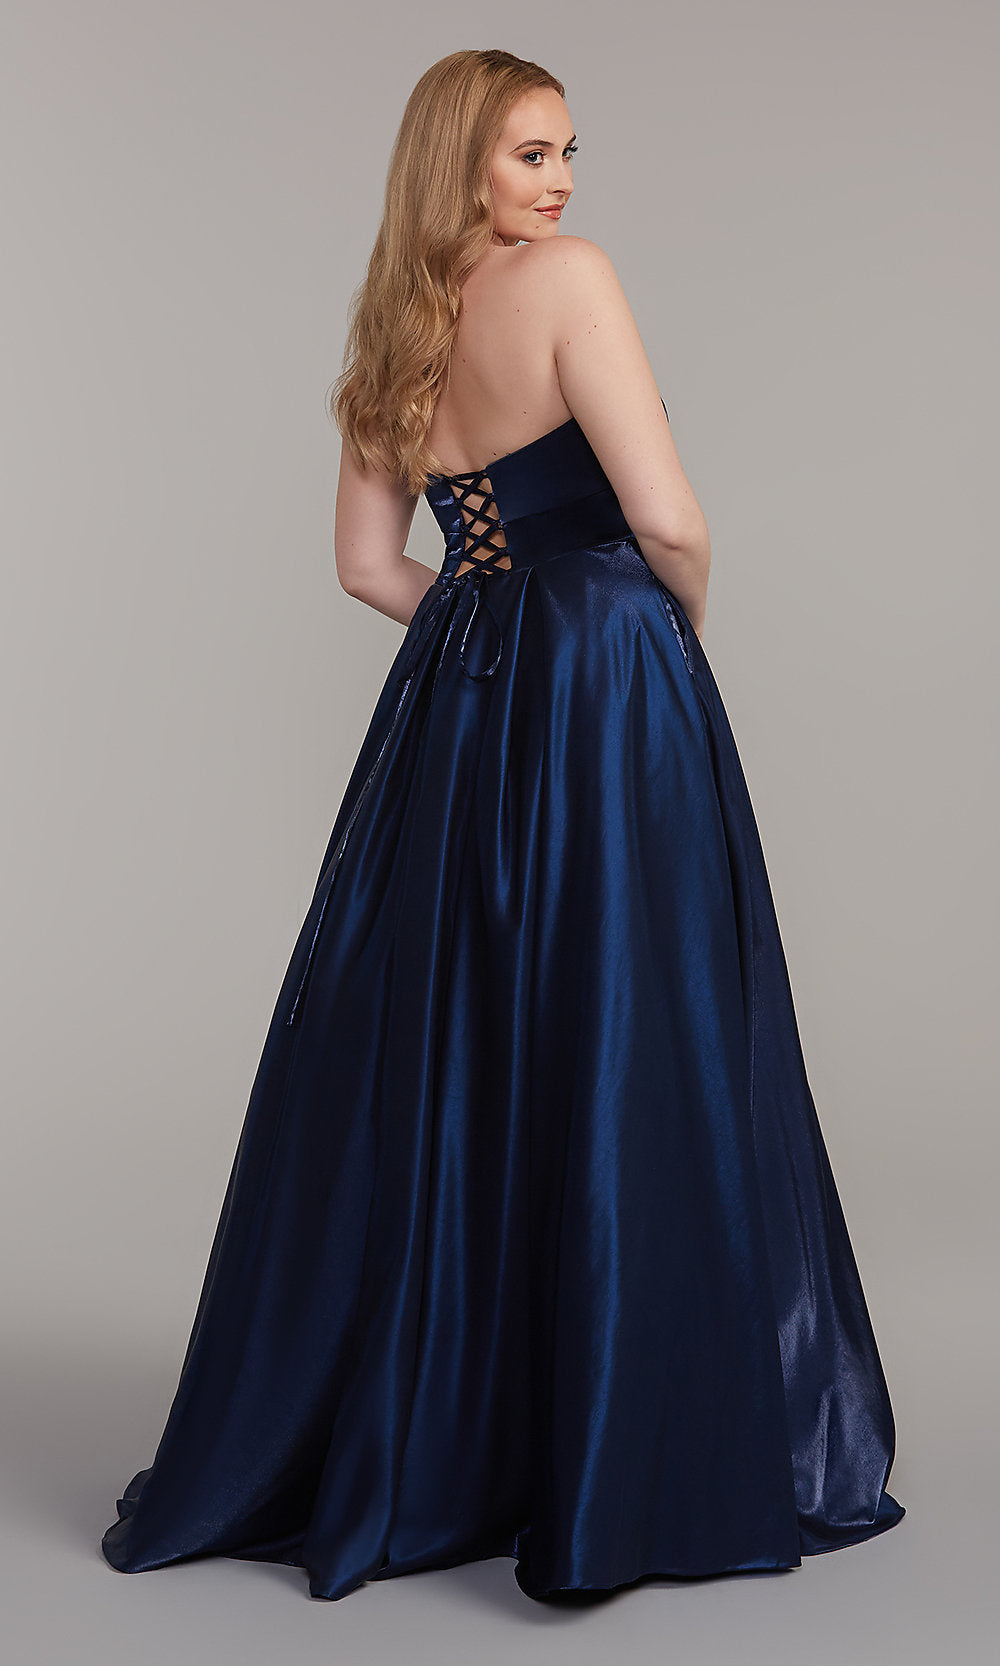  Strapless Sweetheart Long A-Line Prom Dress